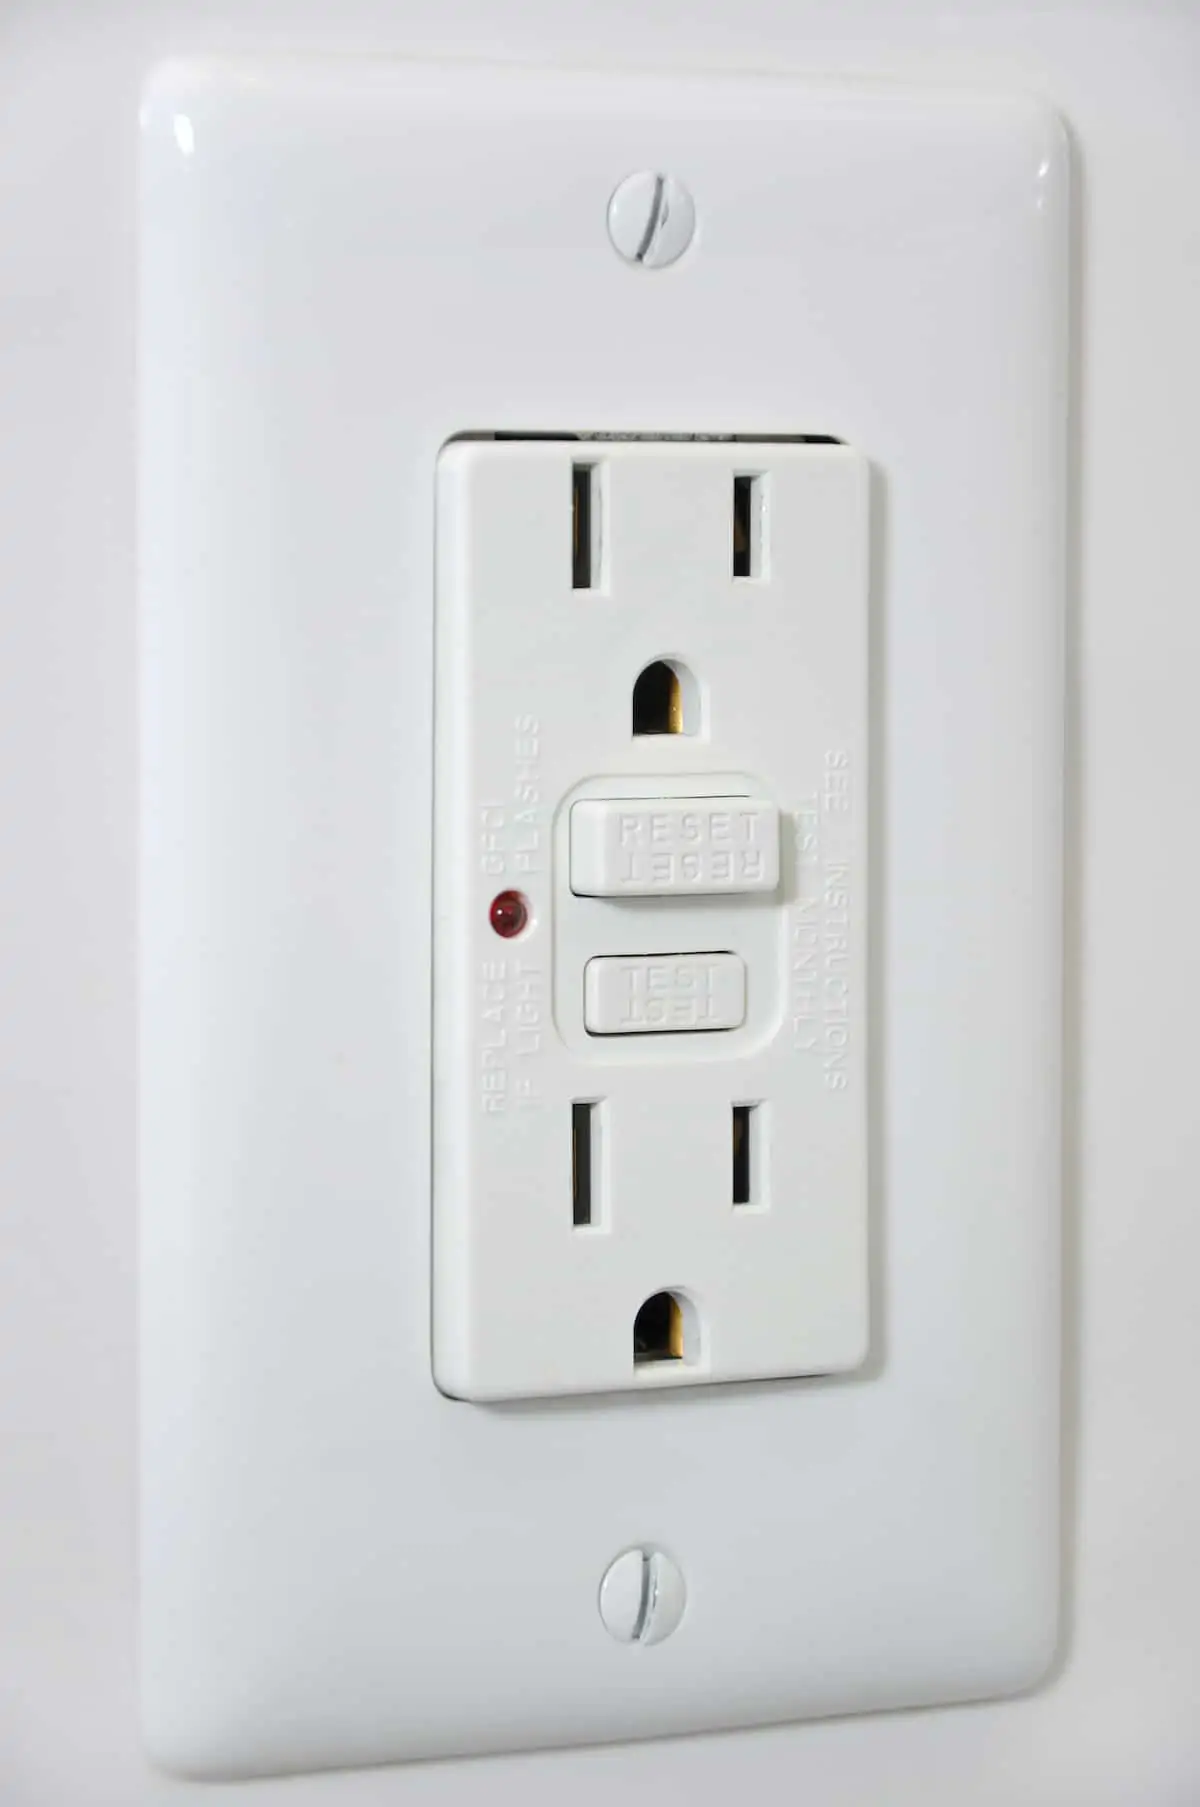 A white wall outlet